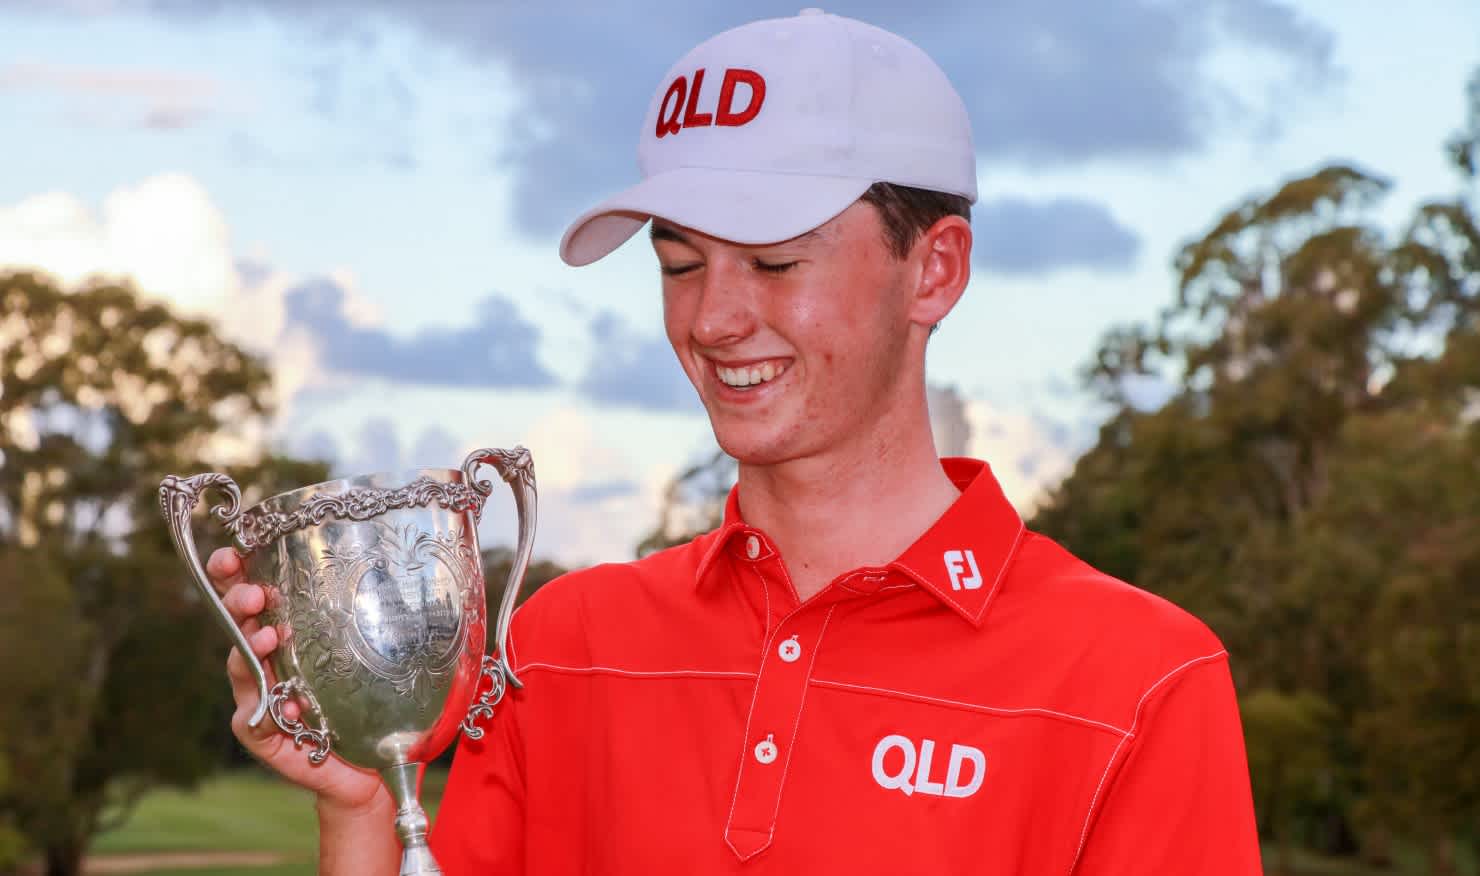 Elvis Smylie admires the 2019 Australian Boys' Amateur trophy after his win at Southport Golf Club.